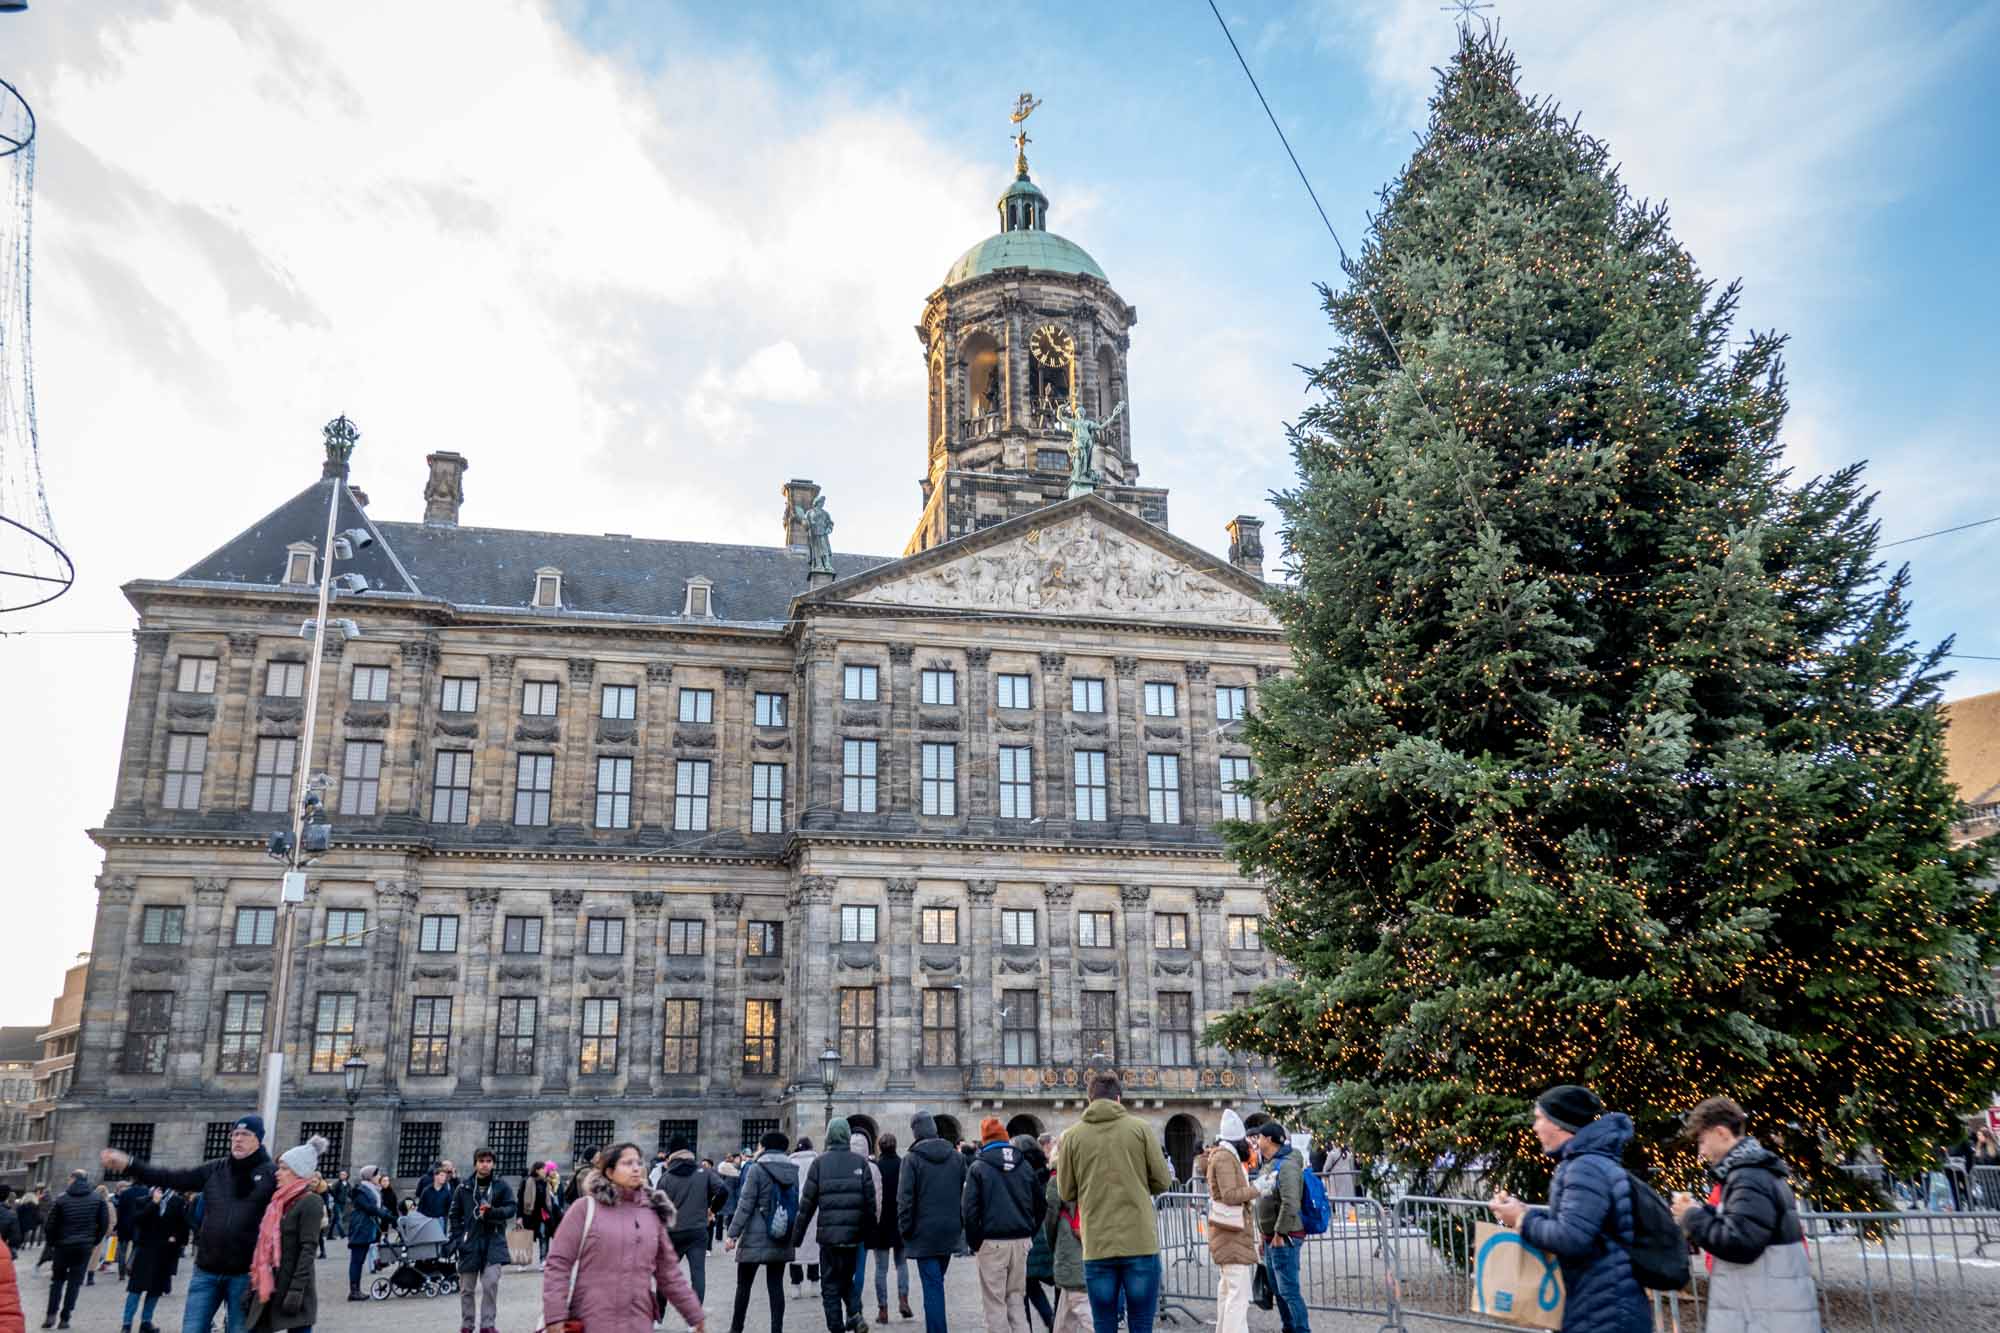 Christmas tree in a city square in front of a palace